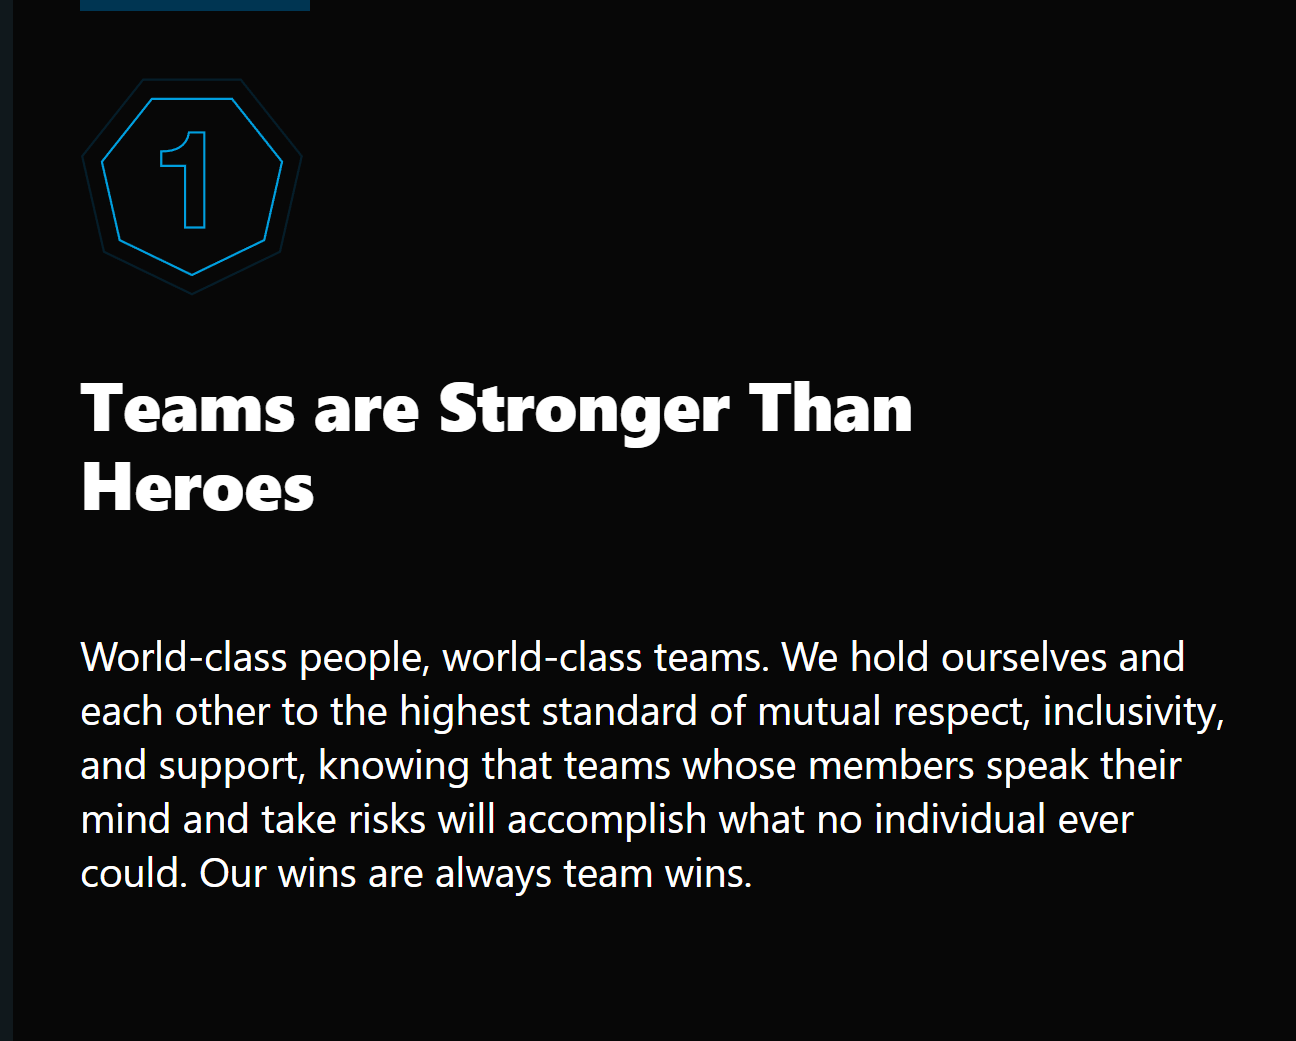 Teams are Stronger than Heroes